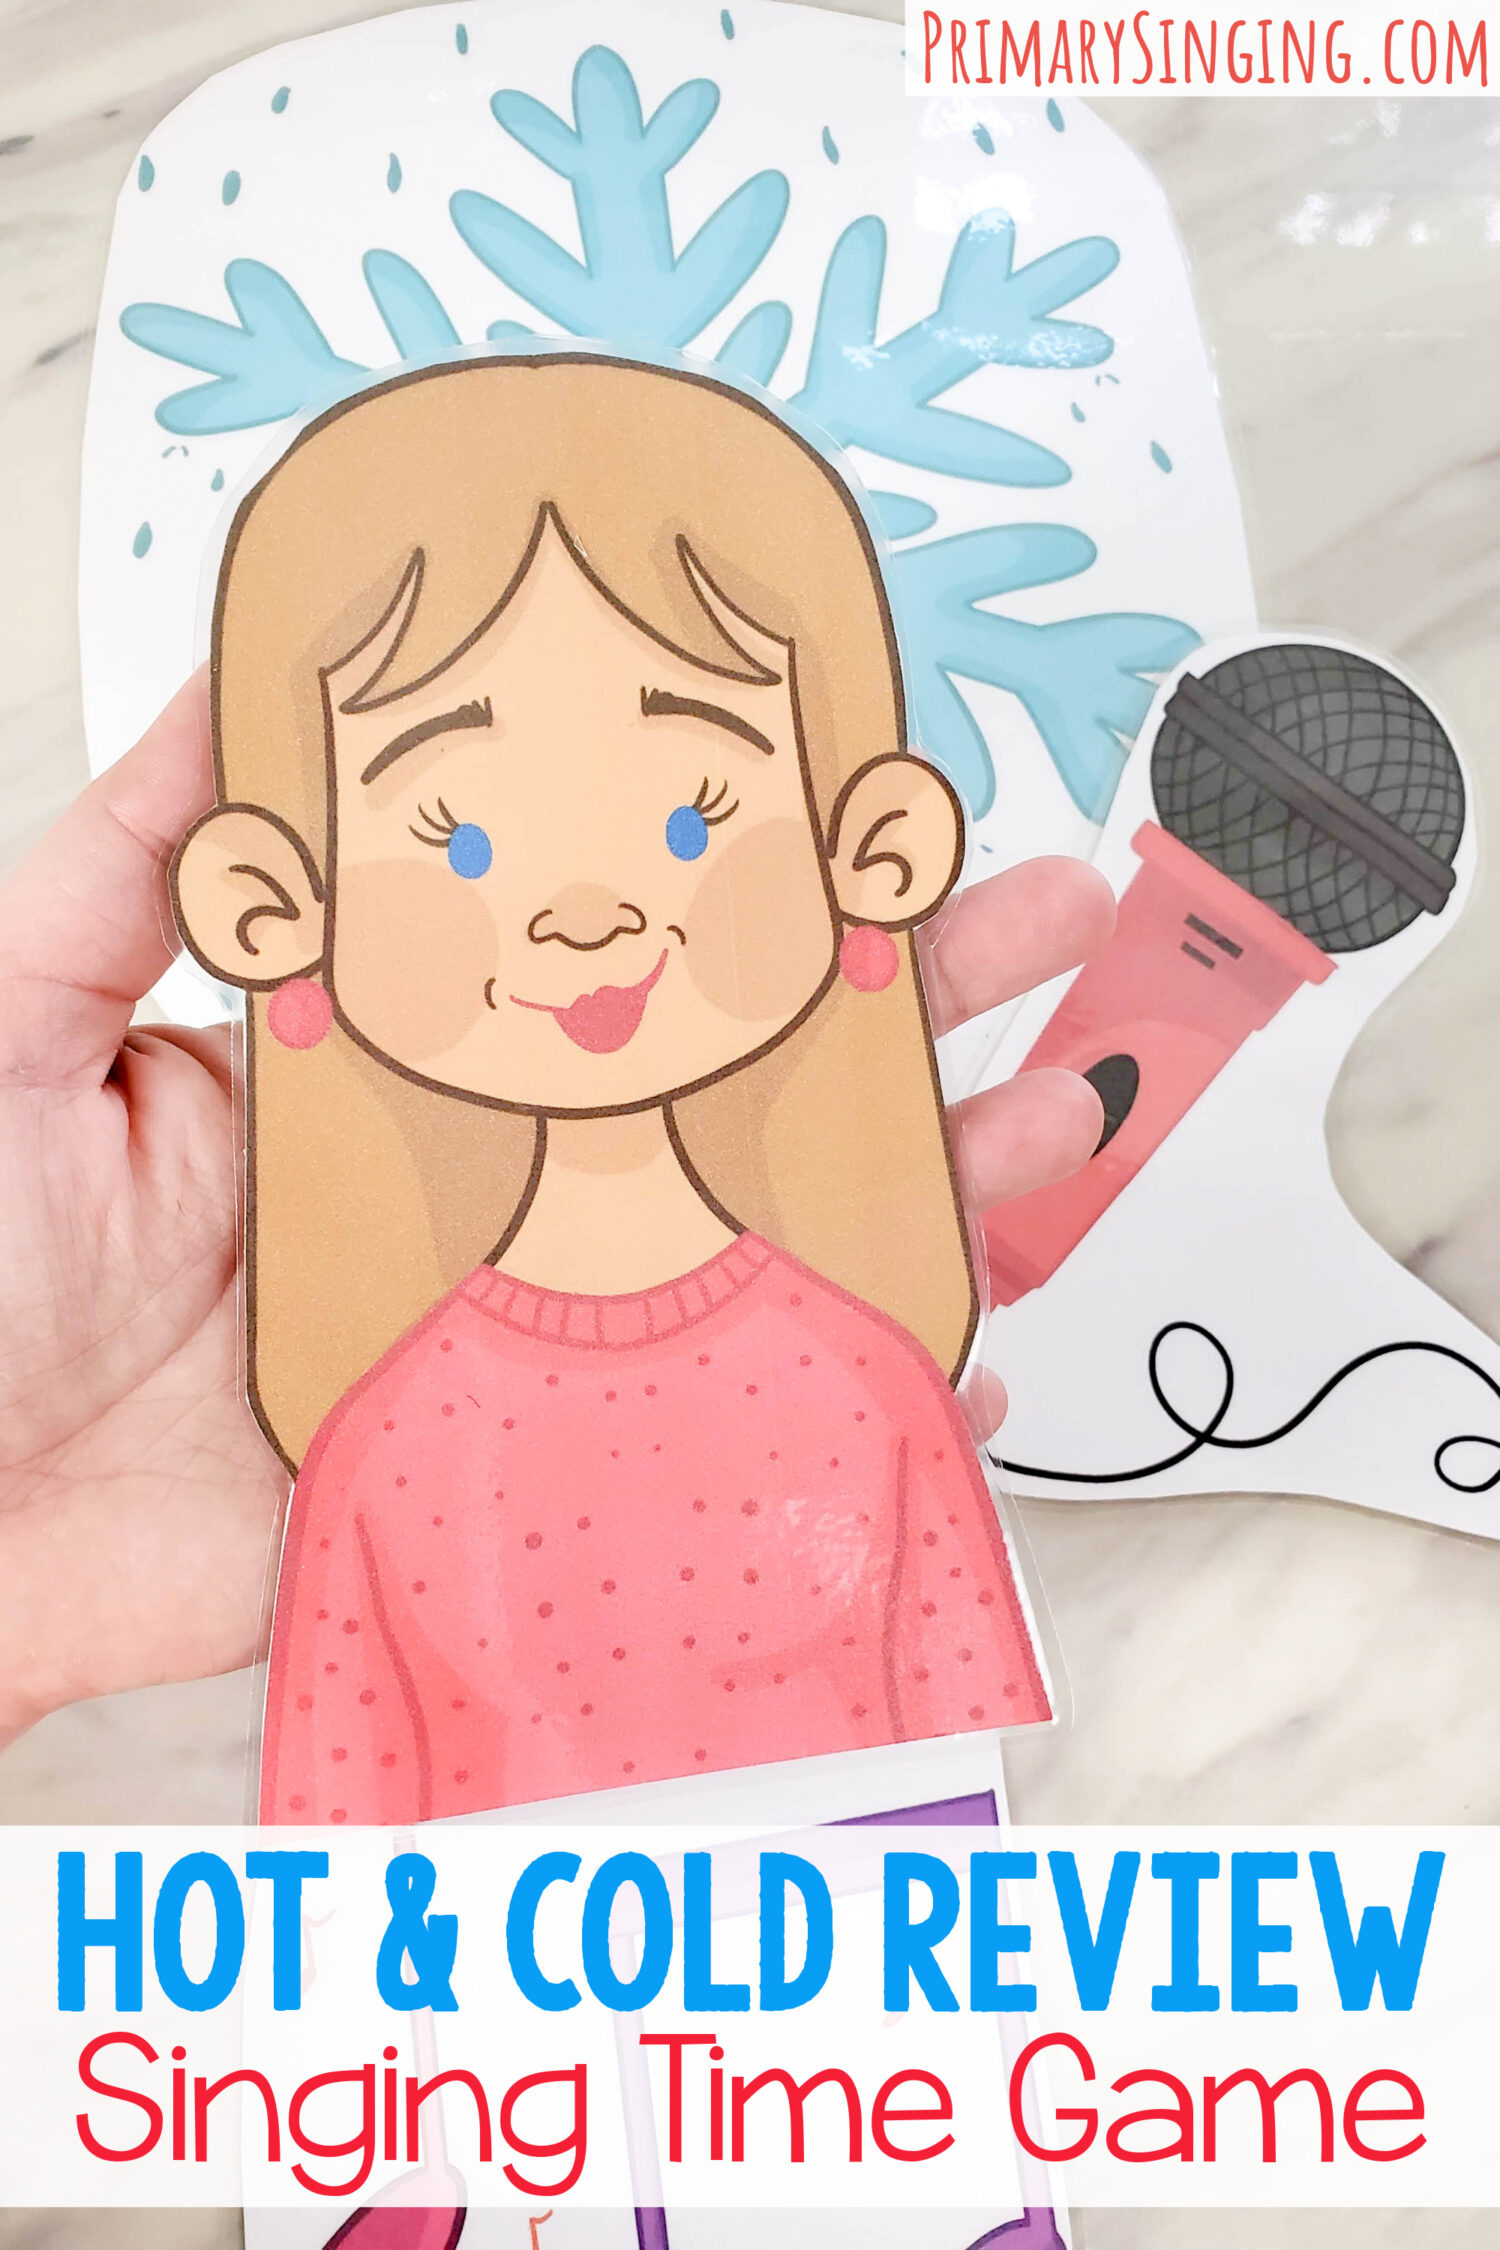 Hot & Cold singing time review game - Sing along with these fun themed occasion cards. For LDS Primary music leaders printable activity idea!